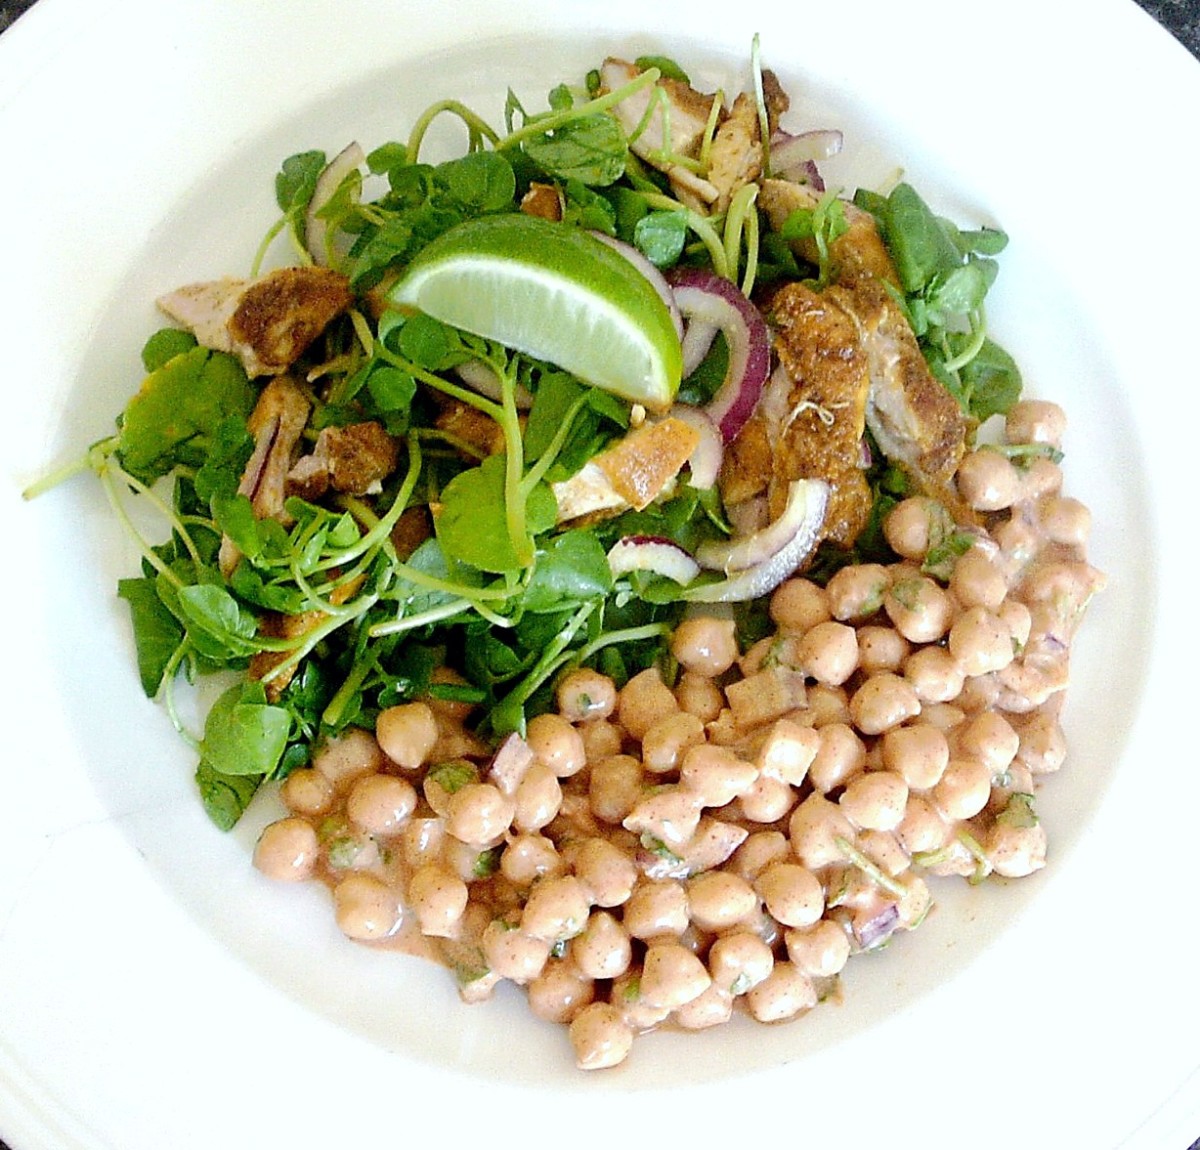 Cold curried chicken thigh salad is served with a spicy chickpea raita